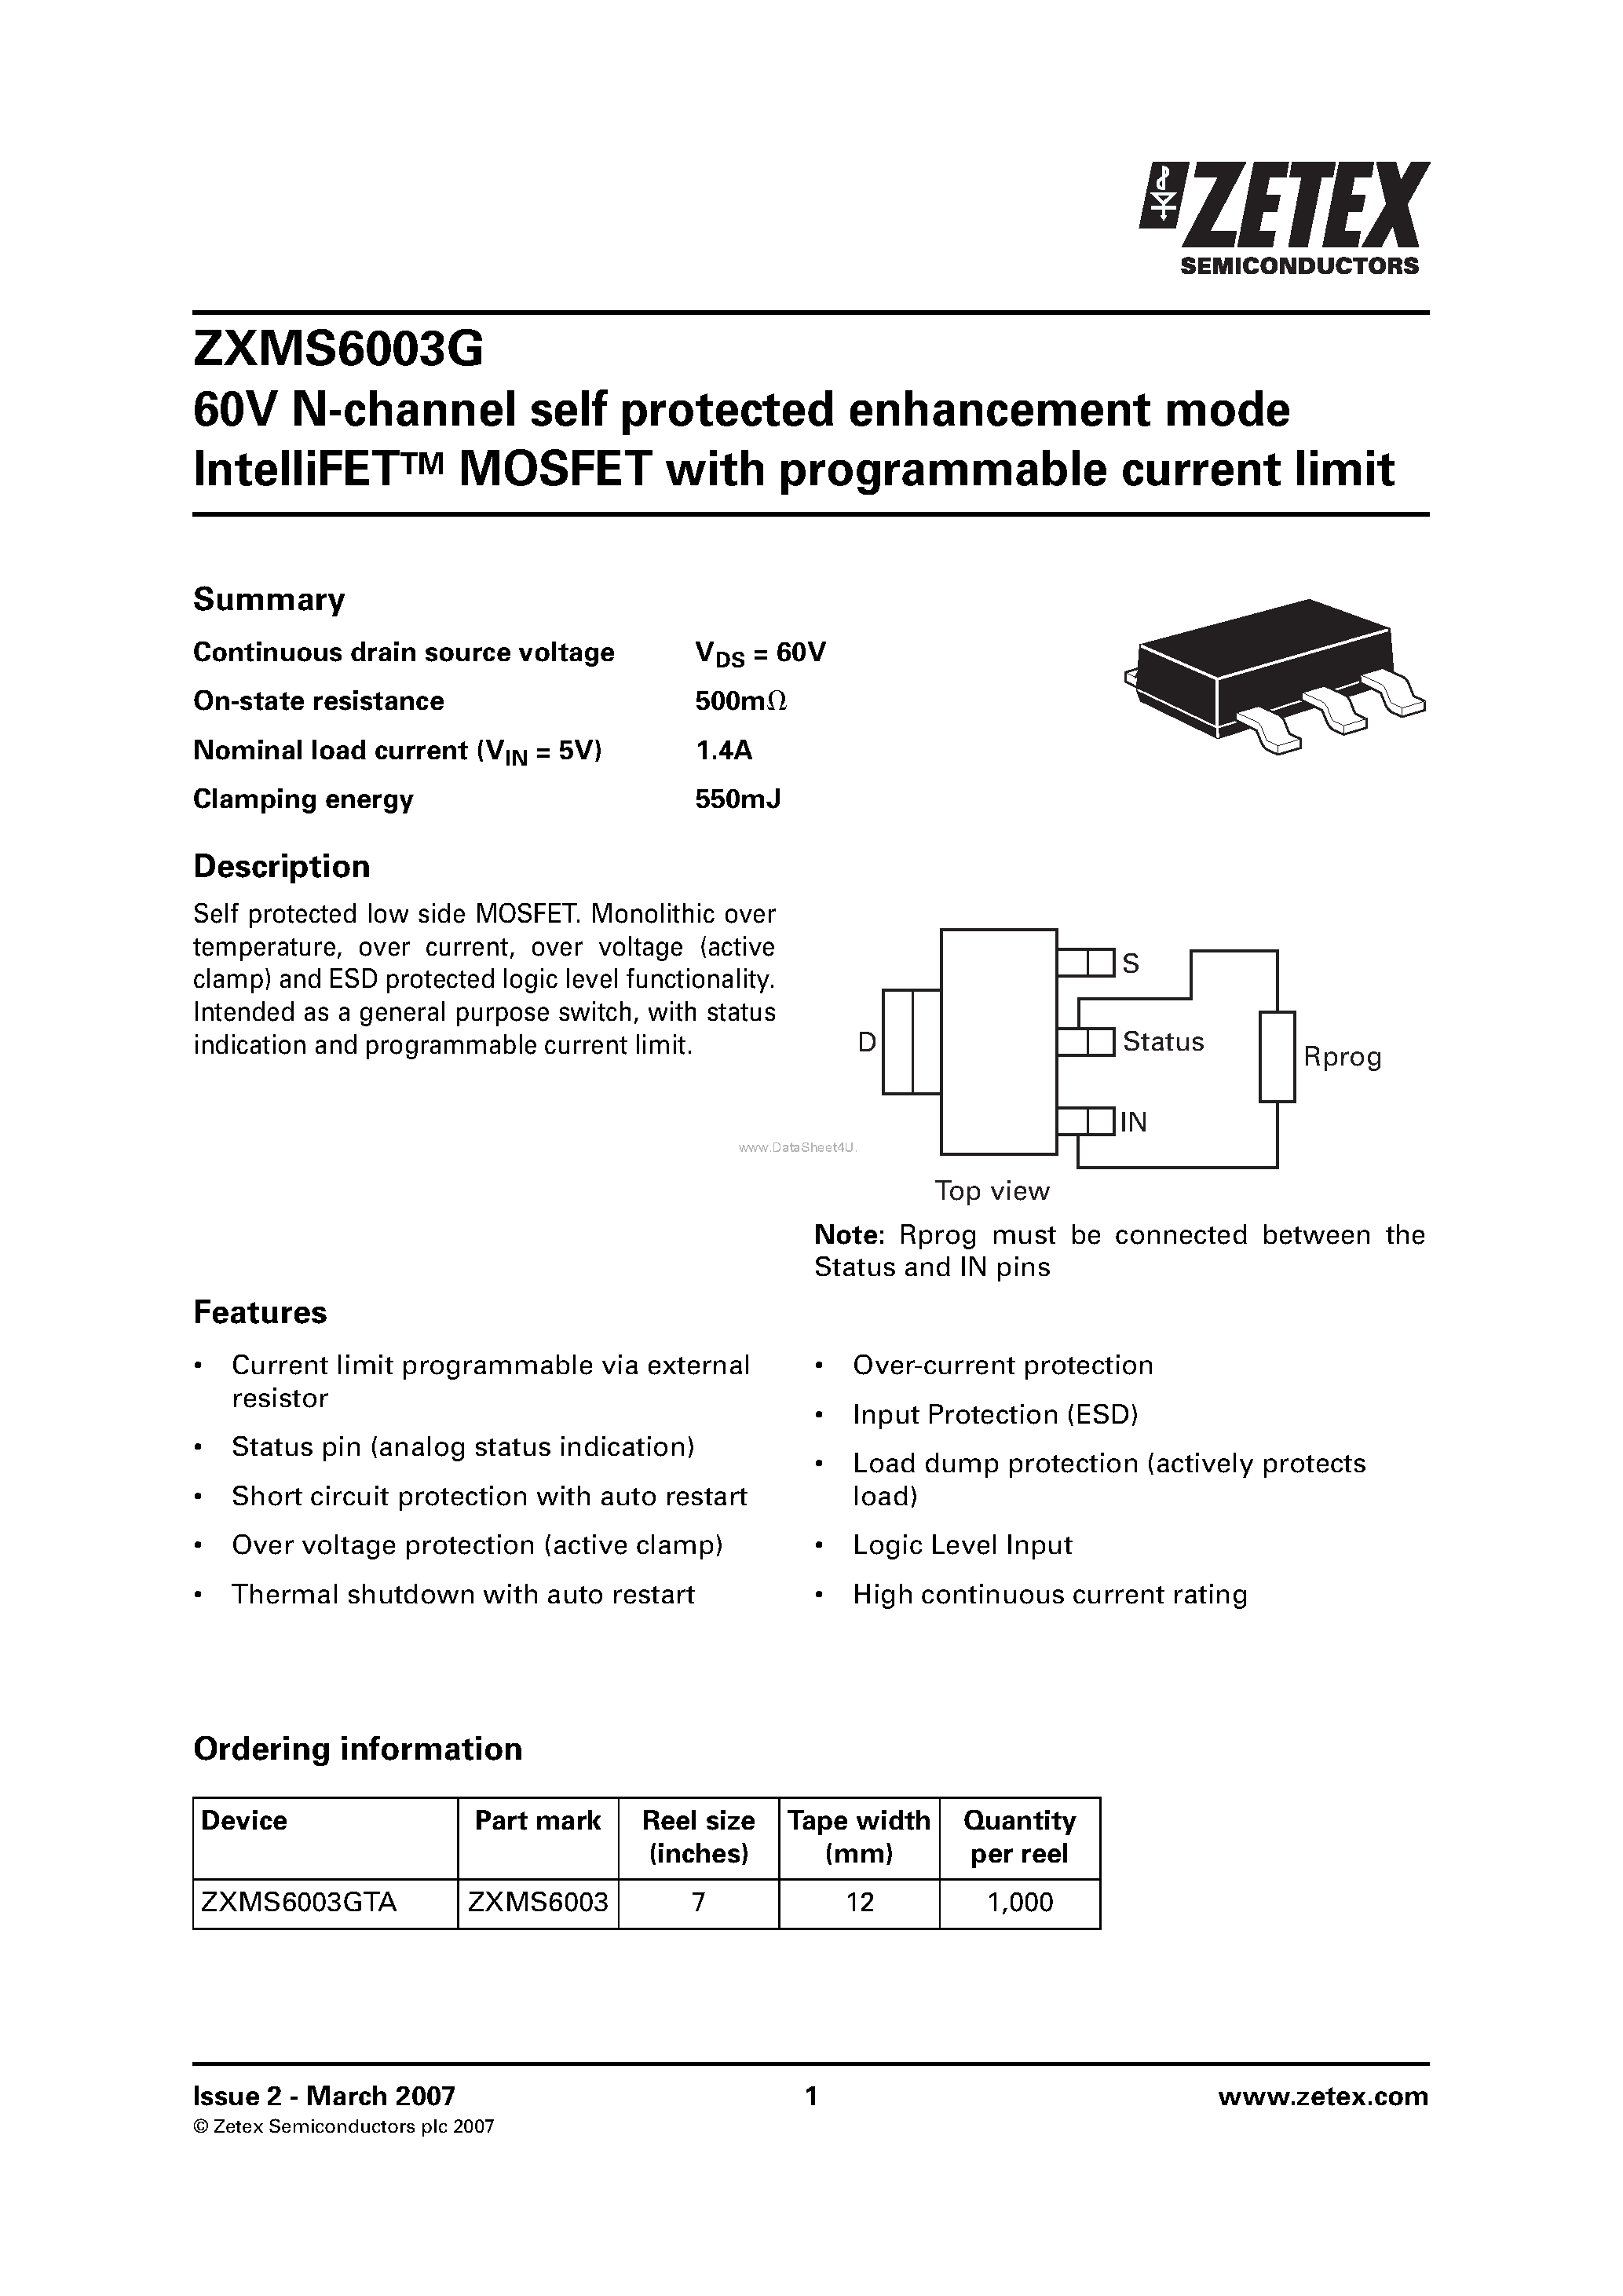 Datasheet ZXMS6003G - N-channel self protected enhancement mode IntelliFET MOSFET page 1